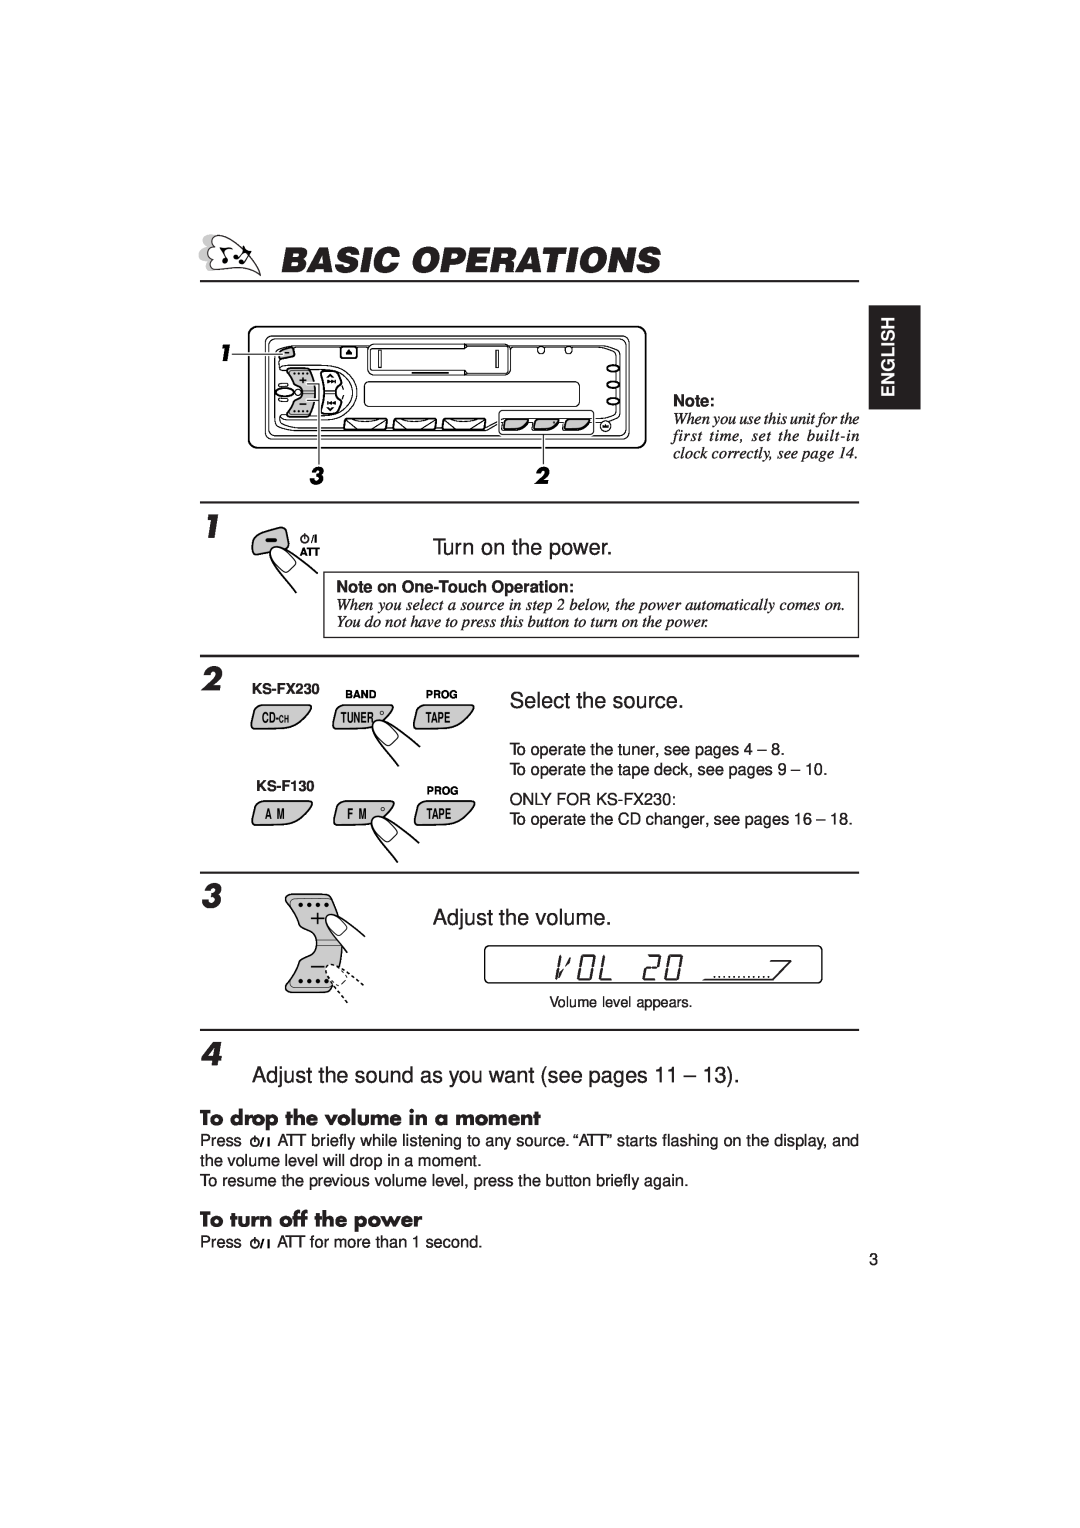 JVC F130 Basic Operations, Turn on the power, Select the source, To drop the volume in a moment, To turn off the power 